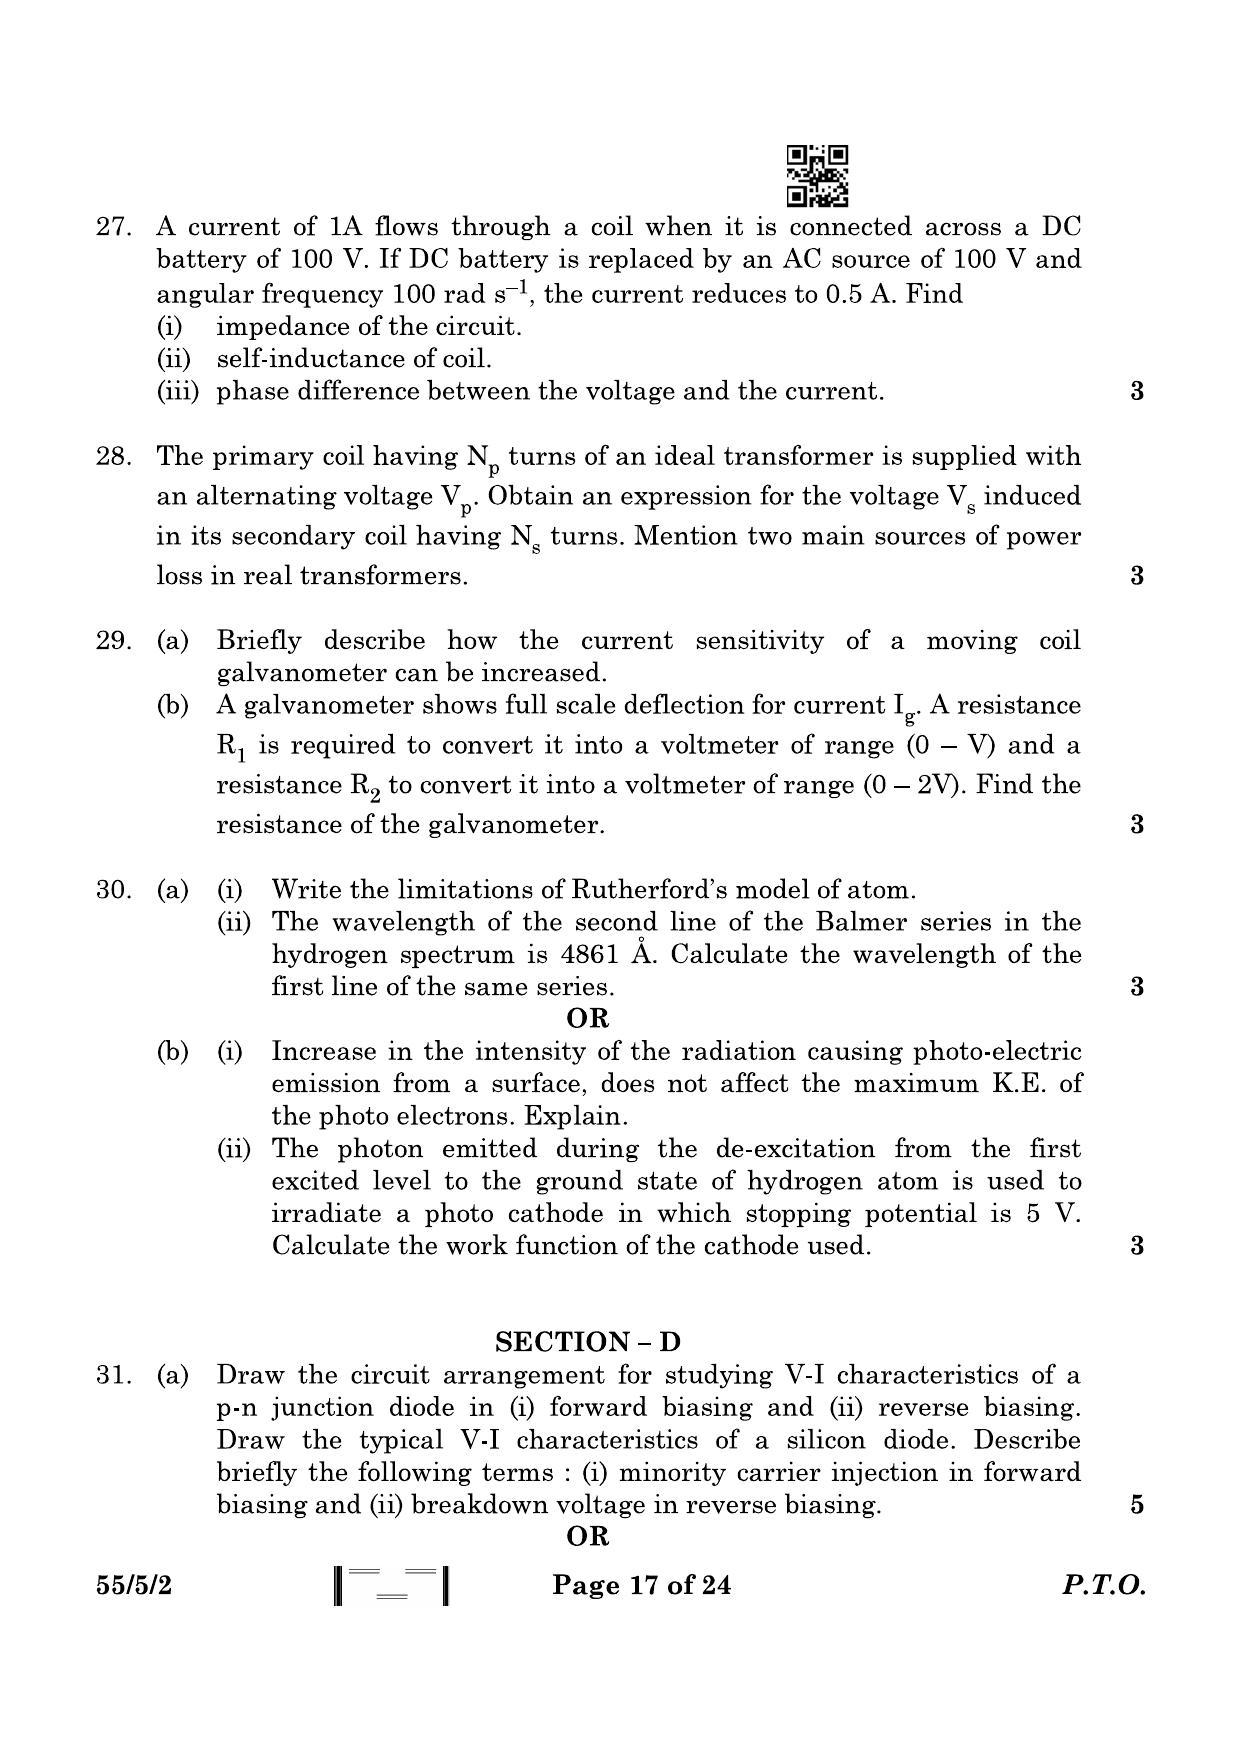 CBSE Class 12 55-5-2 Physics 2023 Question Paper - Page 17